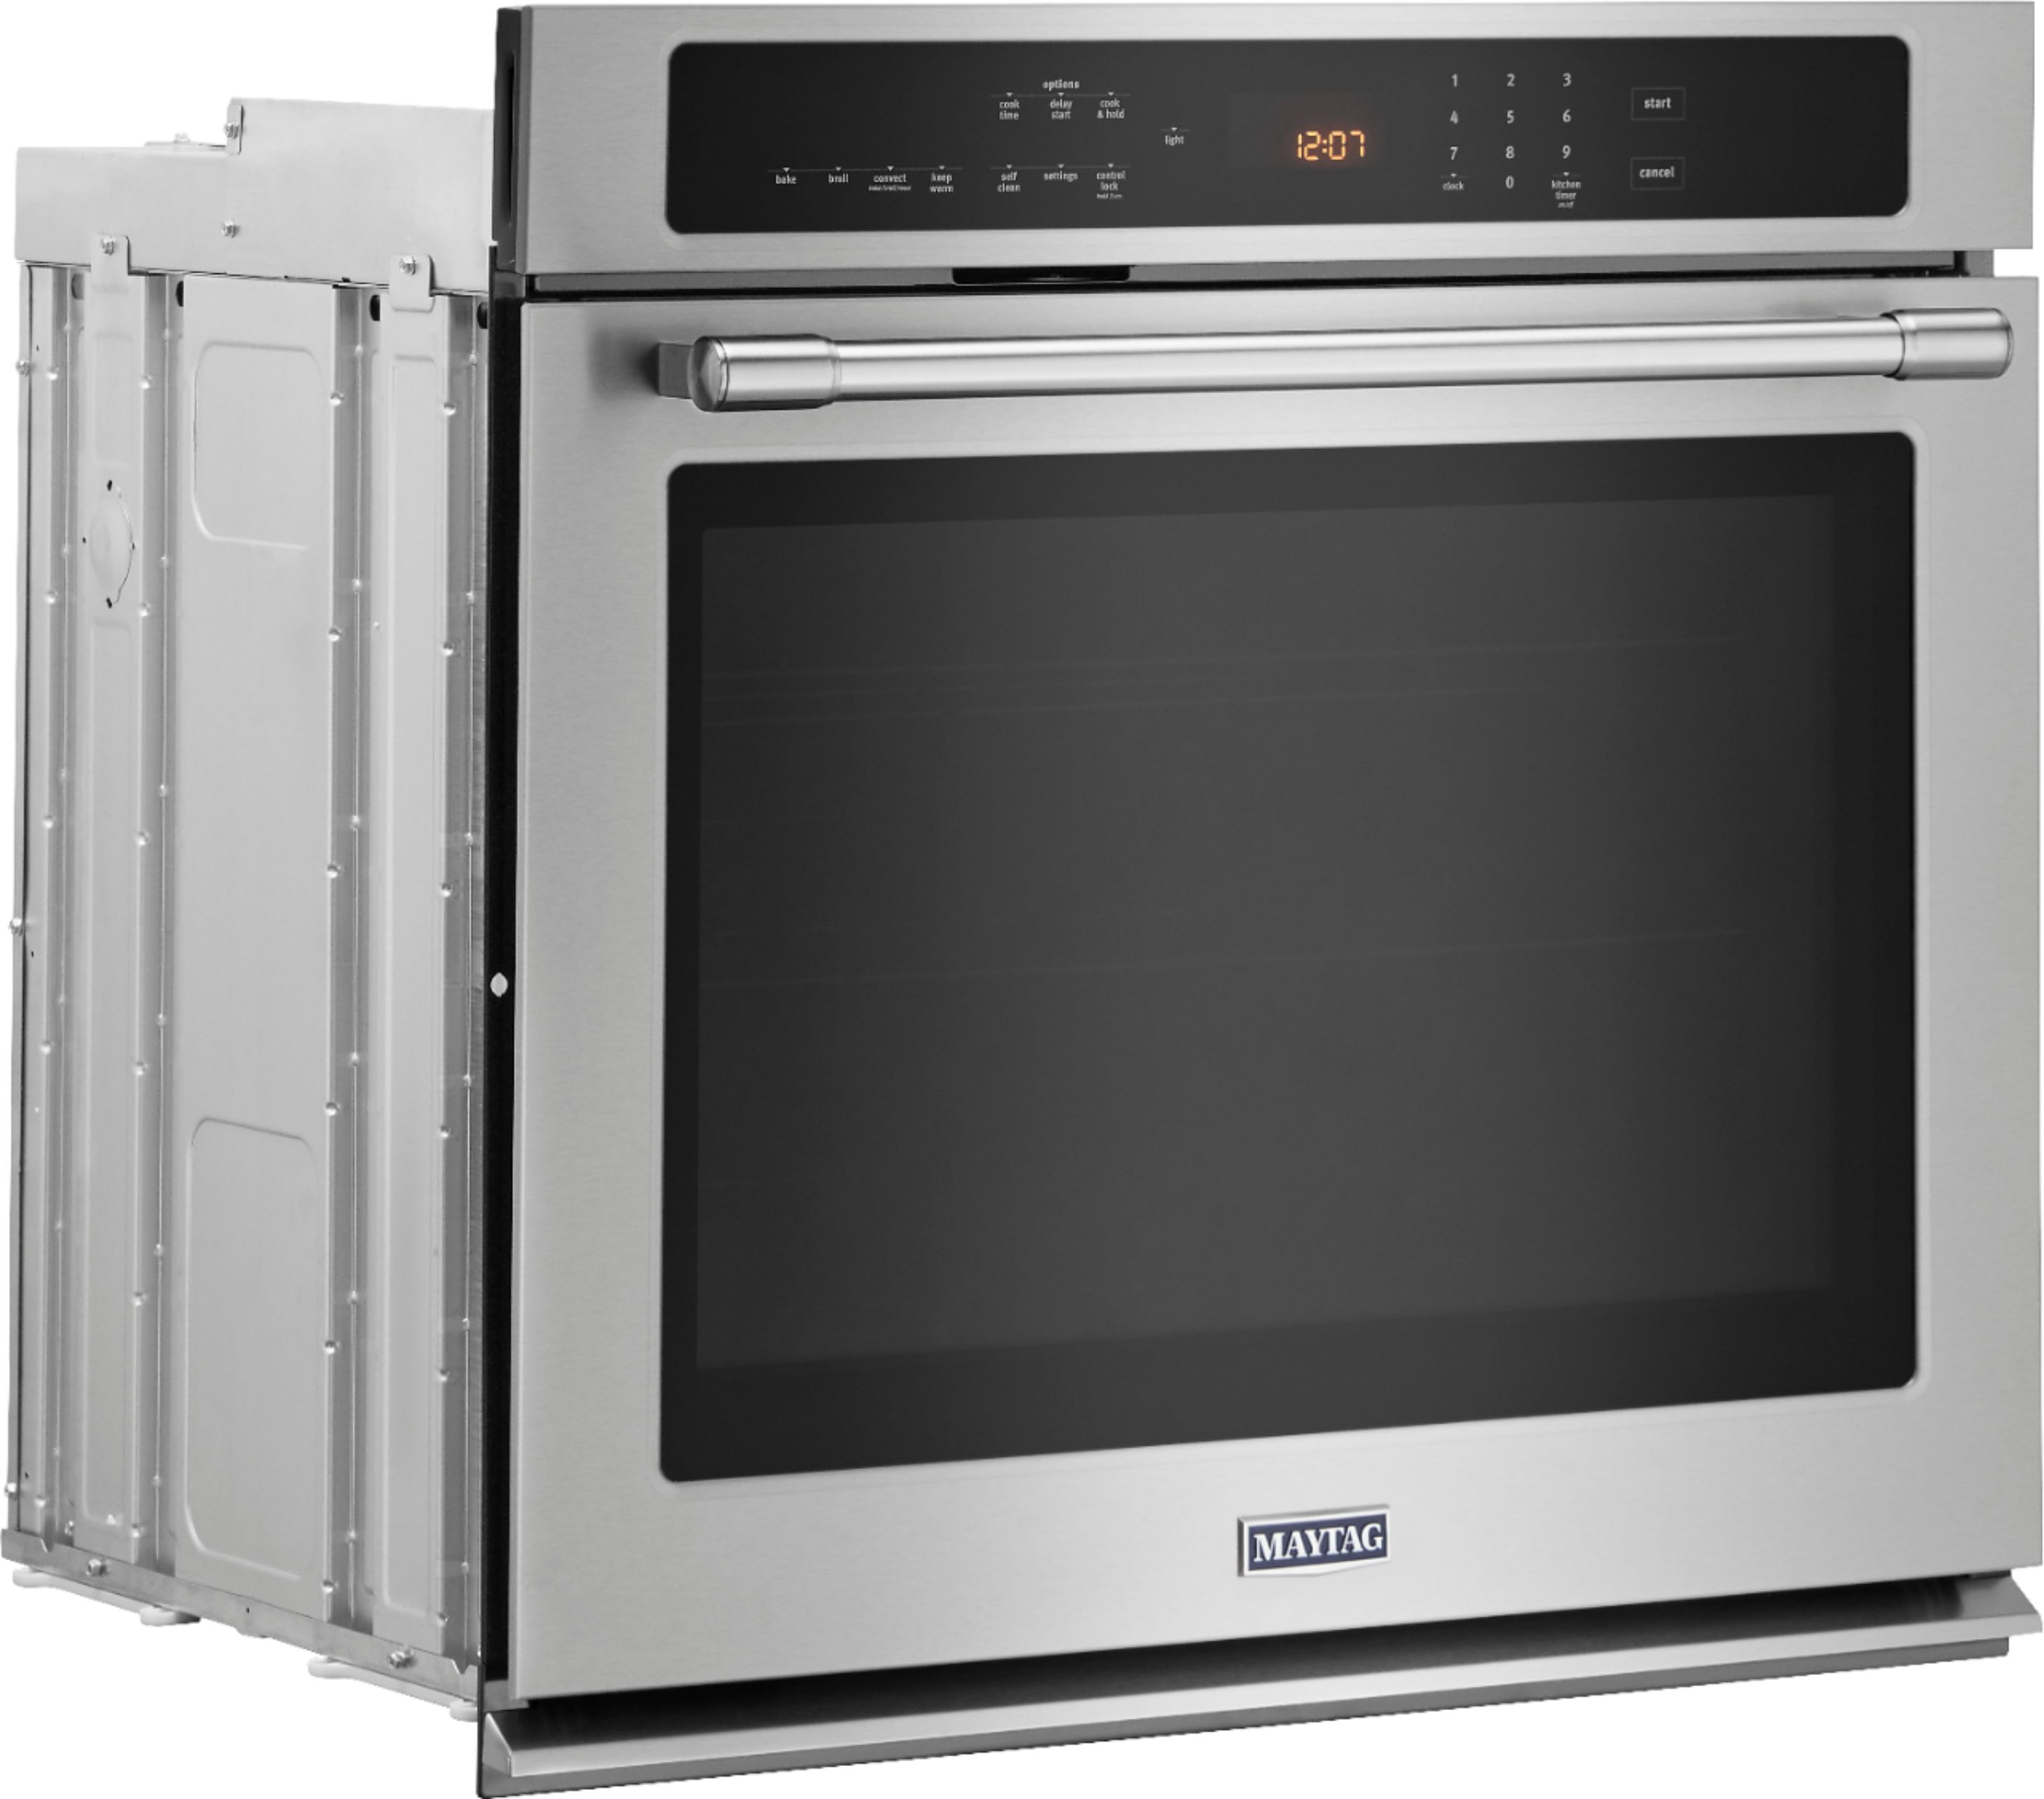 Angle View: Maytag - 30" Built-In Single Electric Convection Wall Oven - Stainless Steel